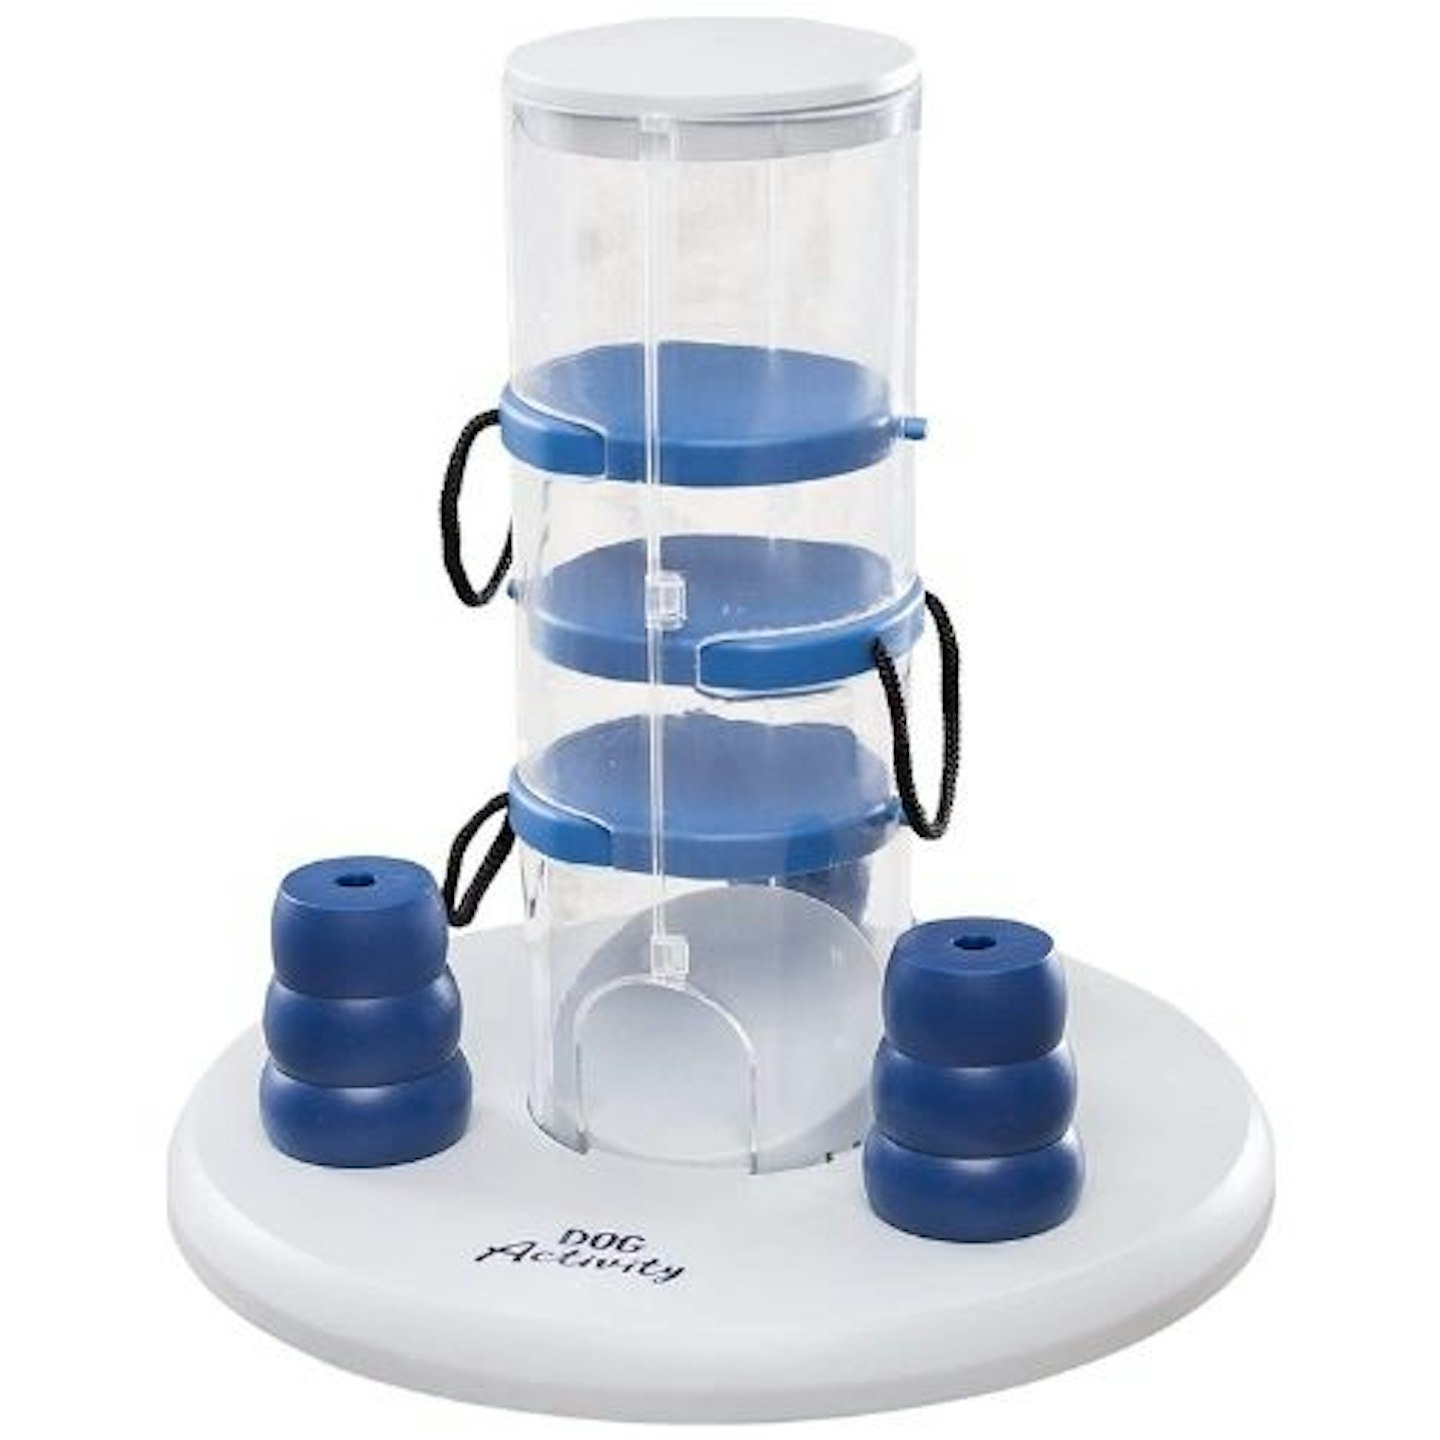 Trixie Dog Activity Strategy Tower Toy - Interactive Dog Toys